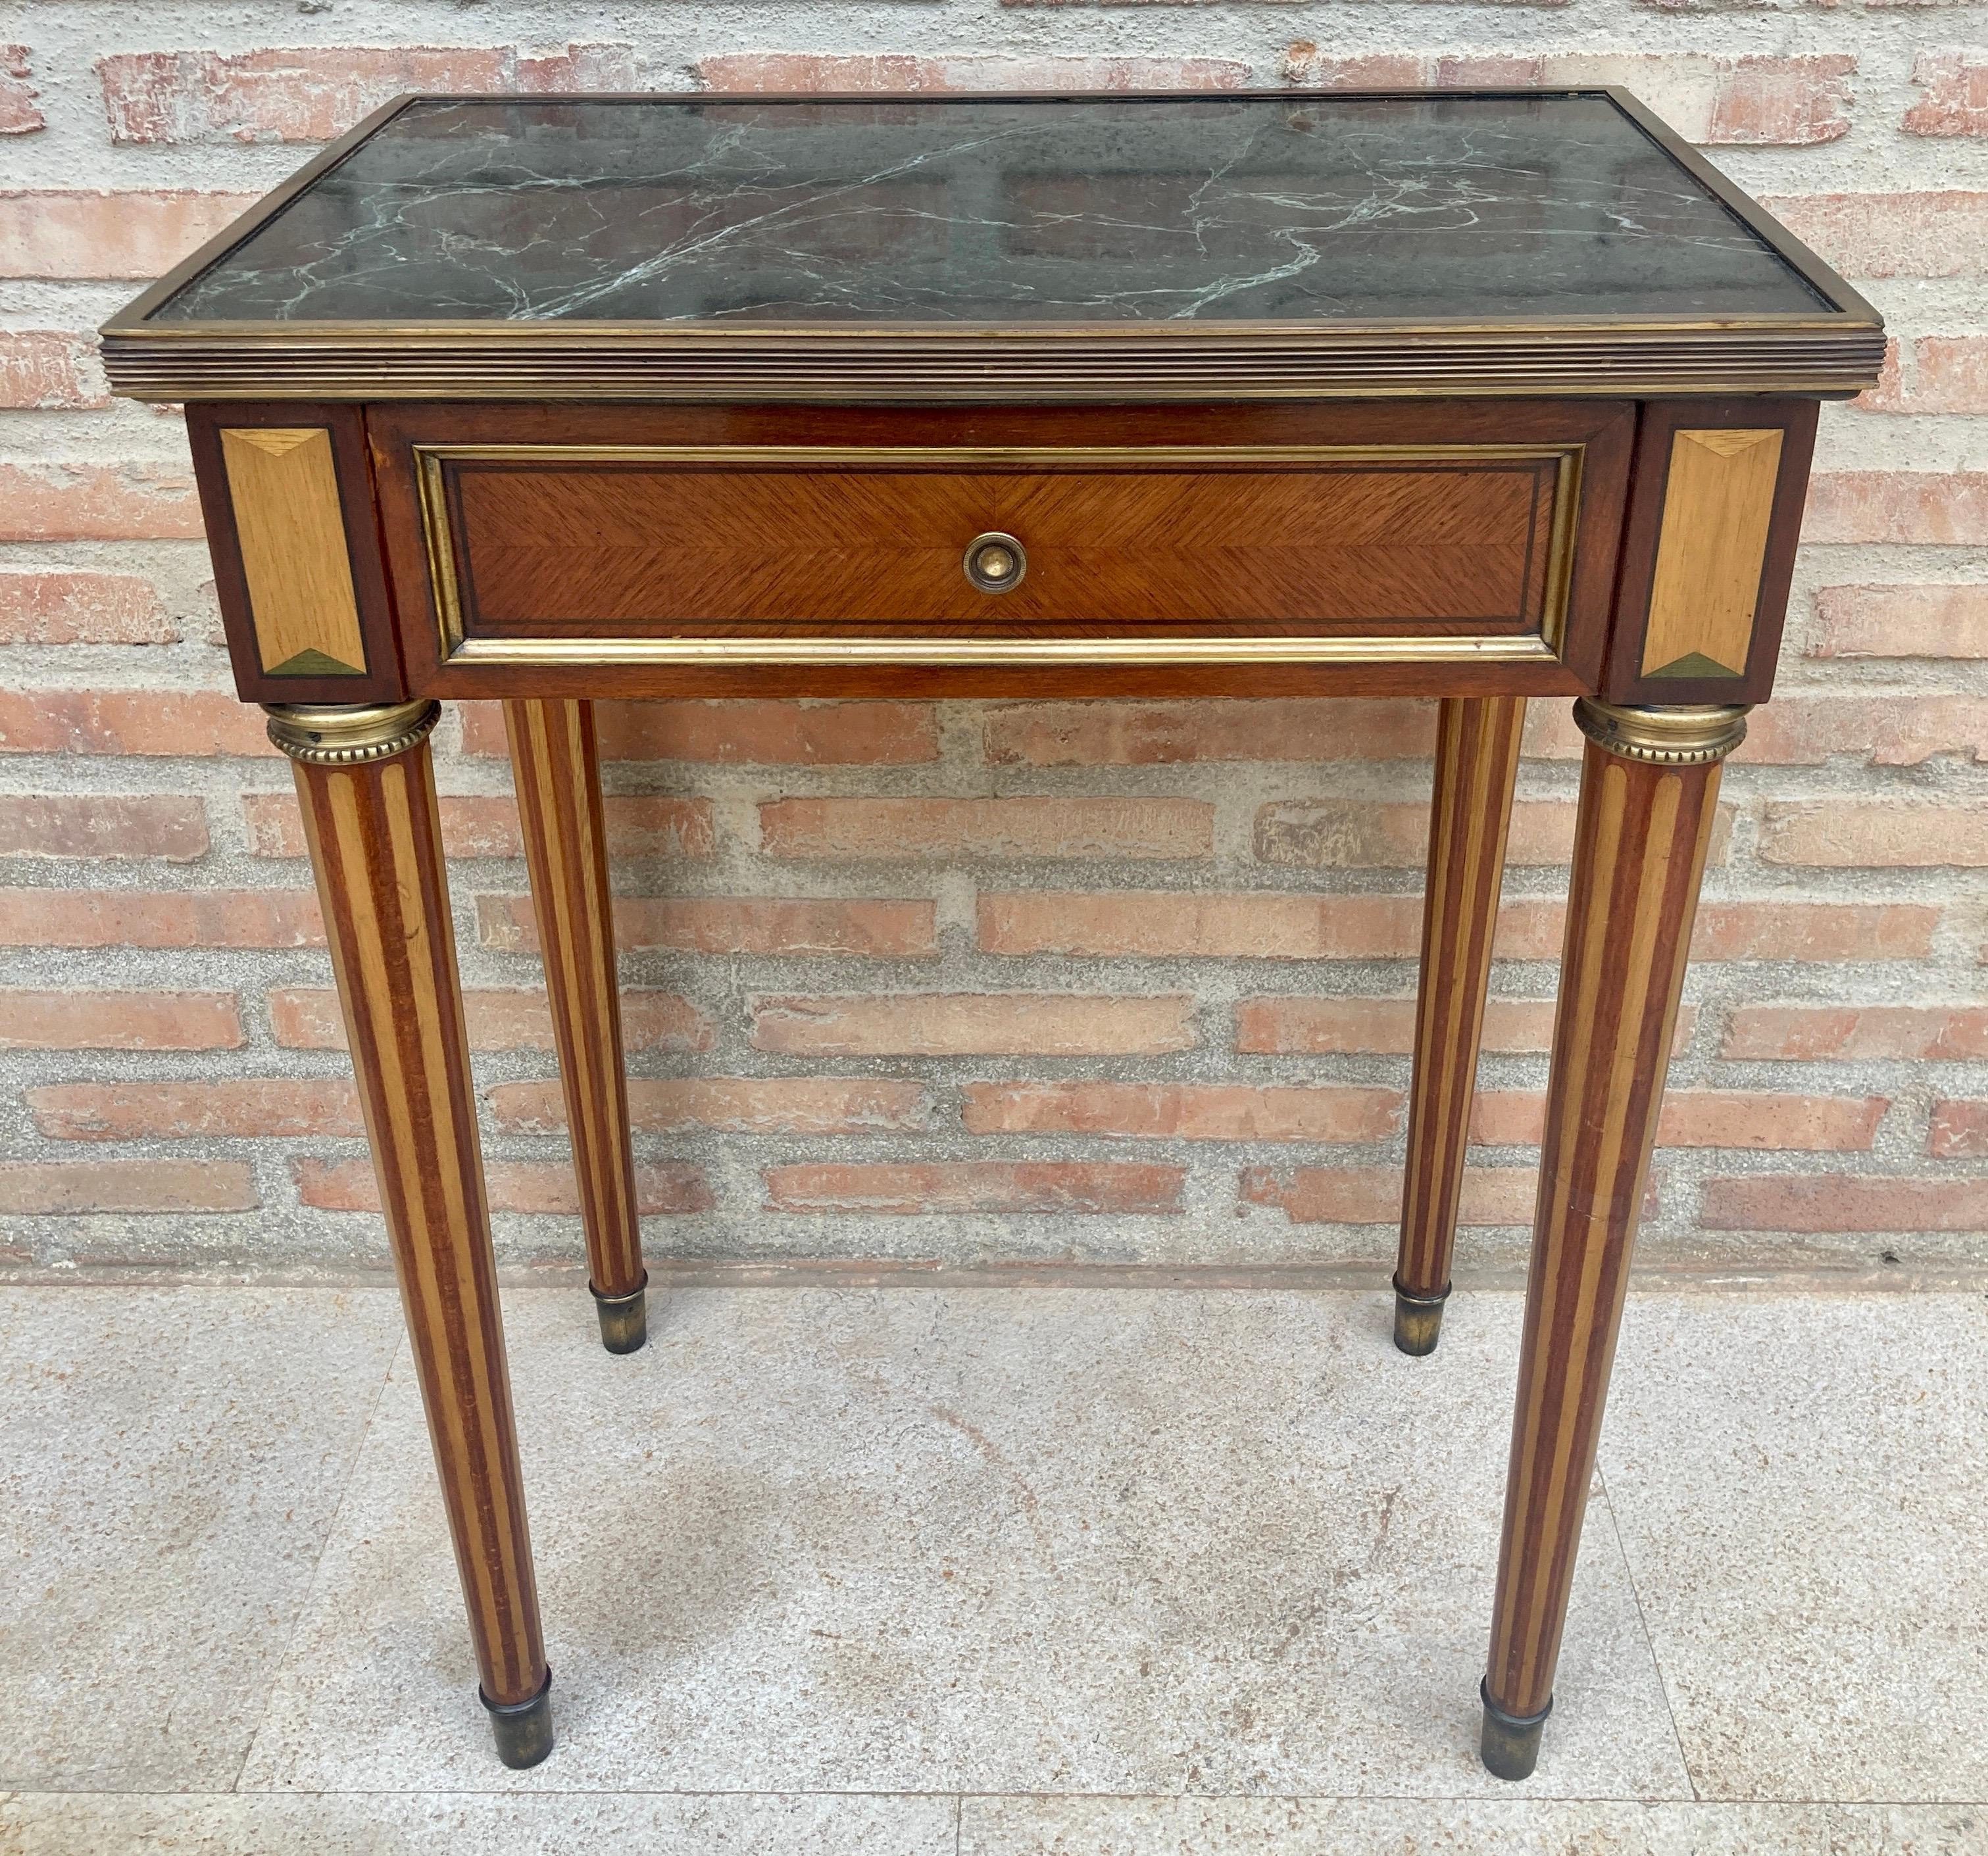 Unusual early 20th century neoclassical style rectangular side table with fluted legs and green and white marble. 
It has a drawer with its bronze handle and the lower part of its fluted legs is decorated with brass caps.
This charming table is an